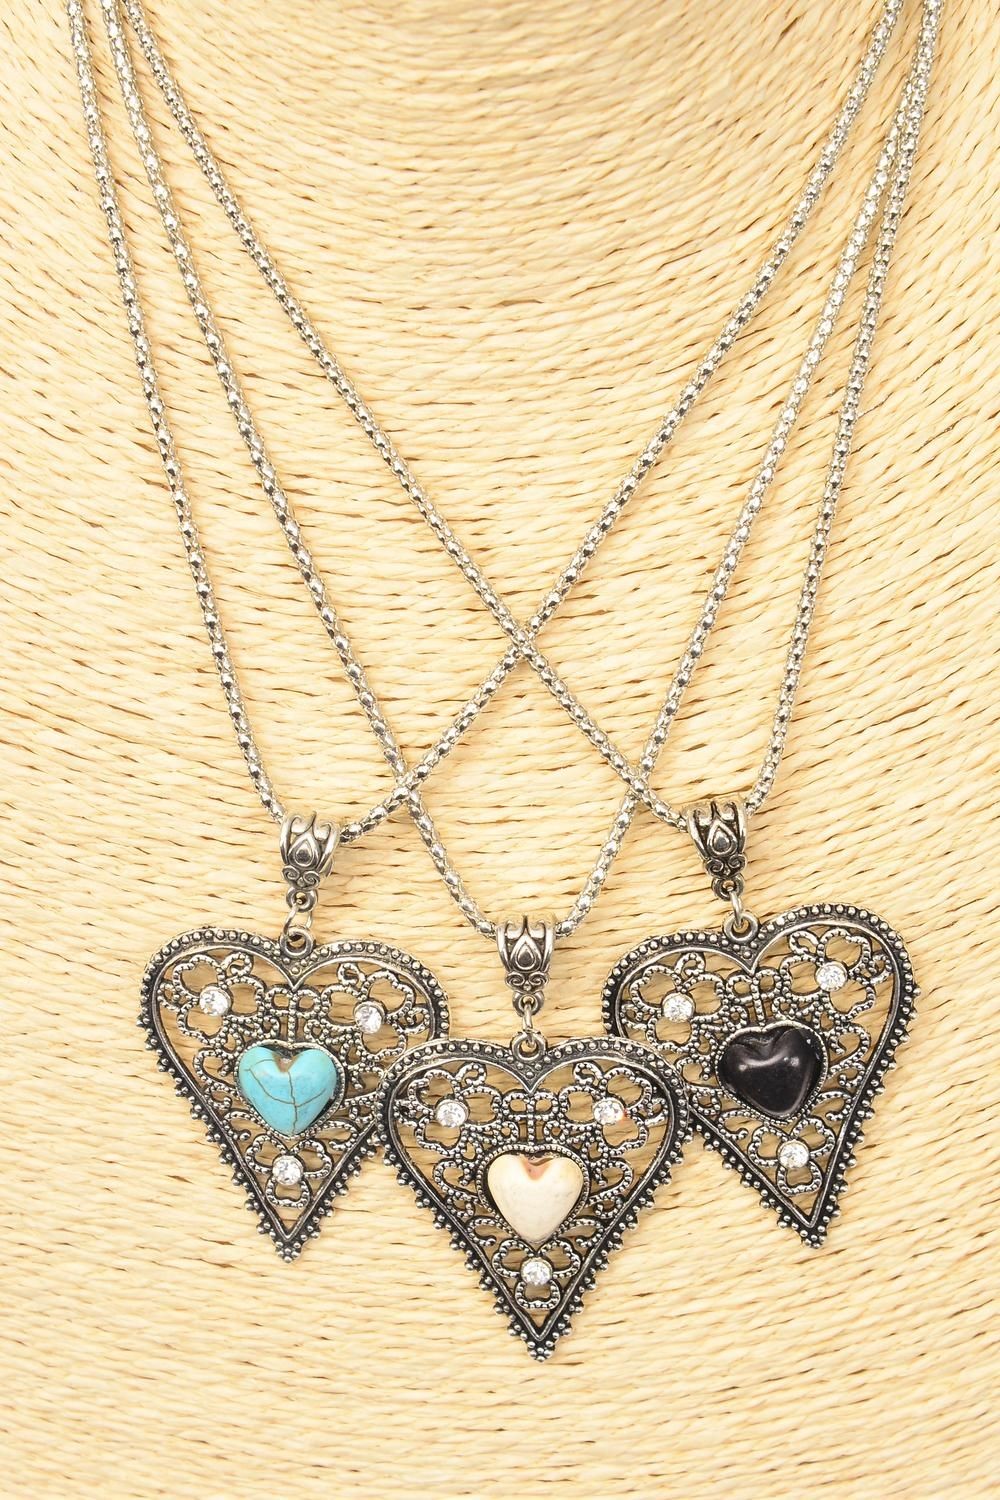 2 Lacey Heart Necklaces -- $7!